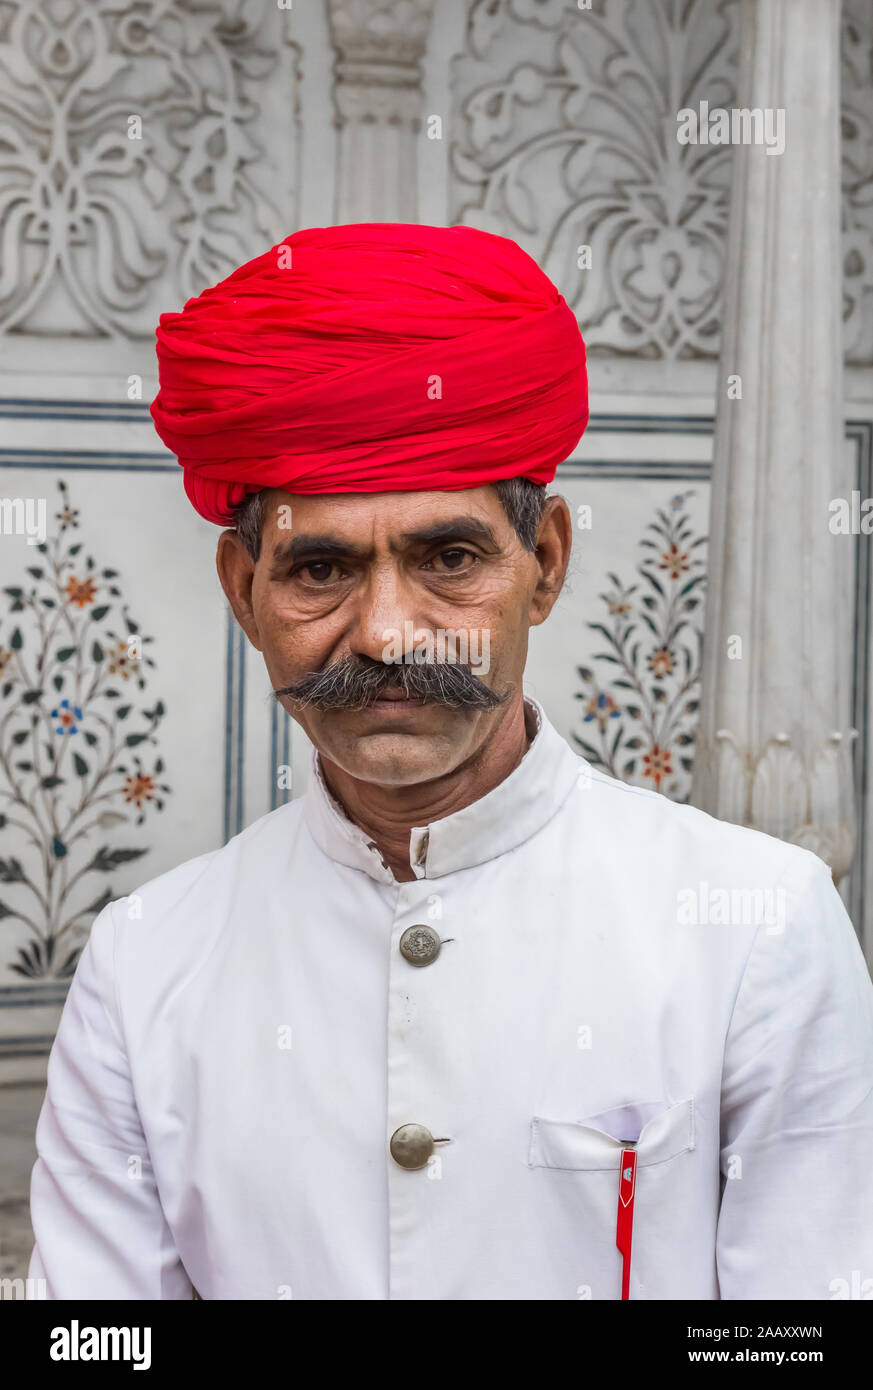 Portrait of a man with moustache and turban in the city palace of Jaipur, India Stock Photo